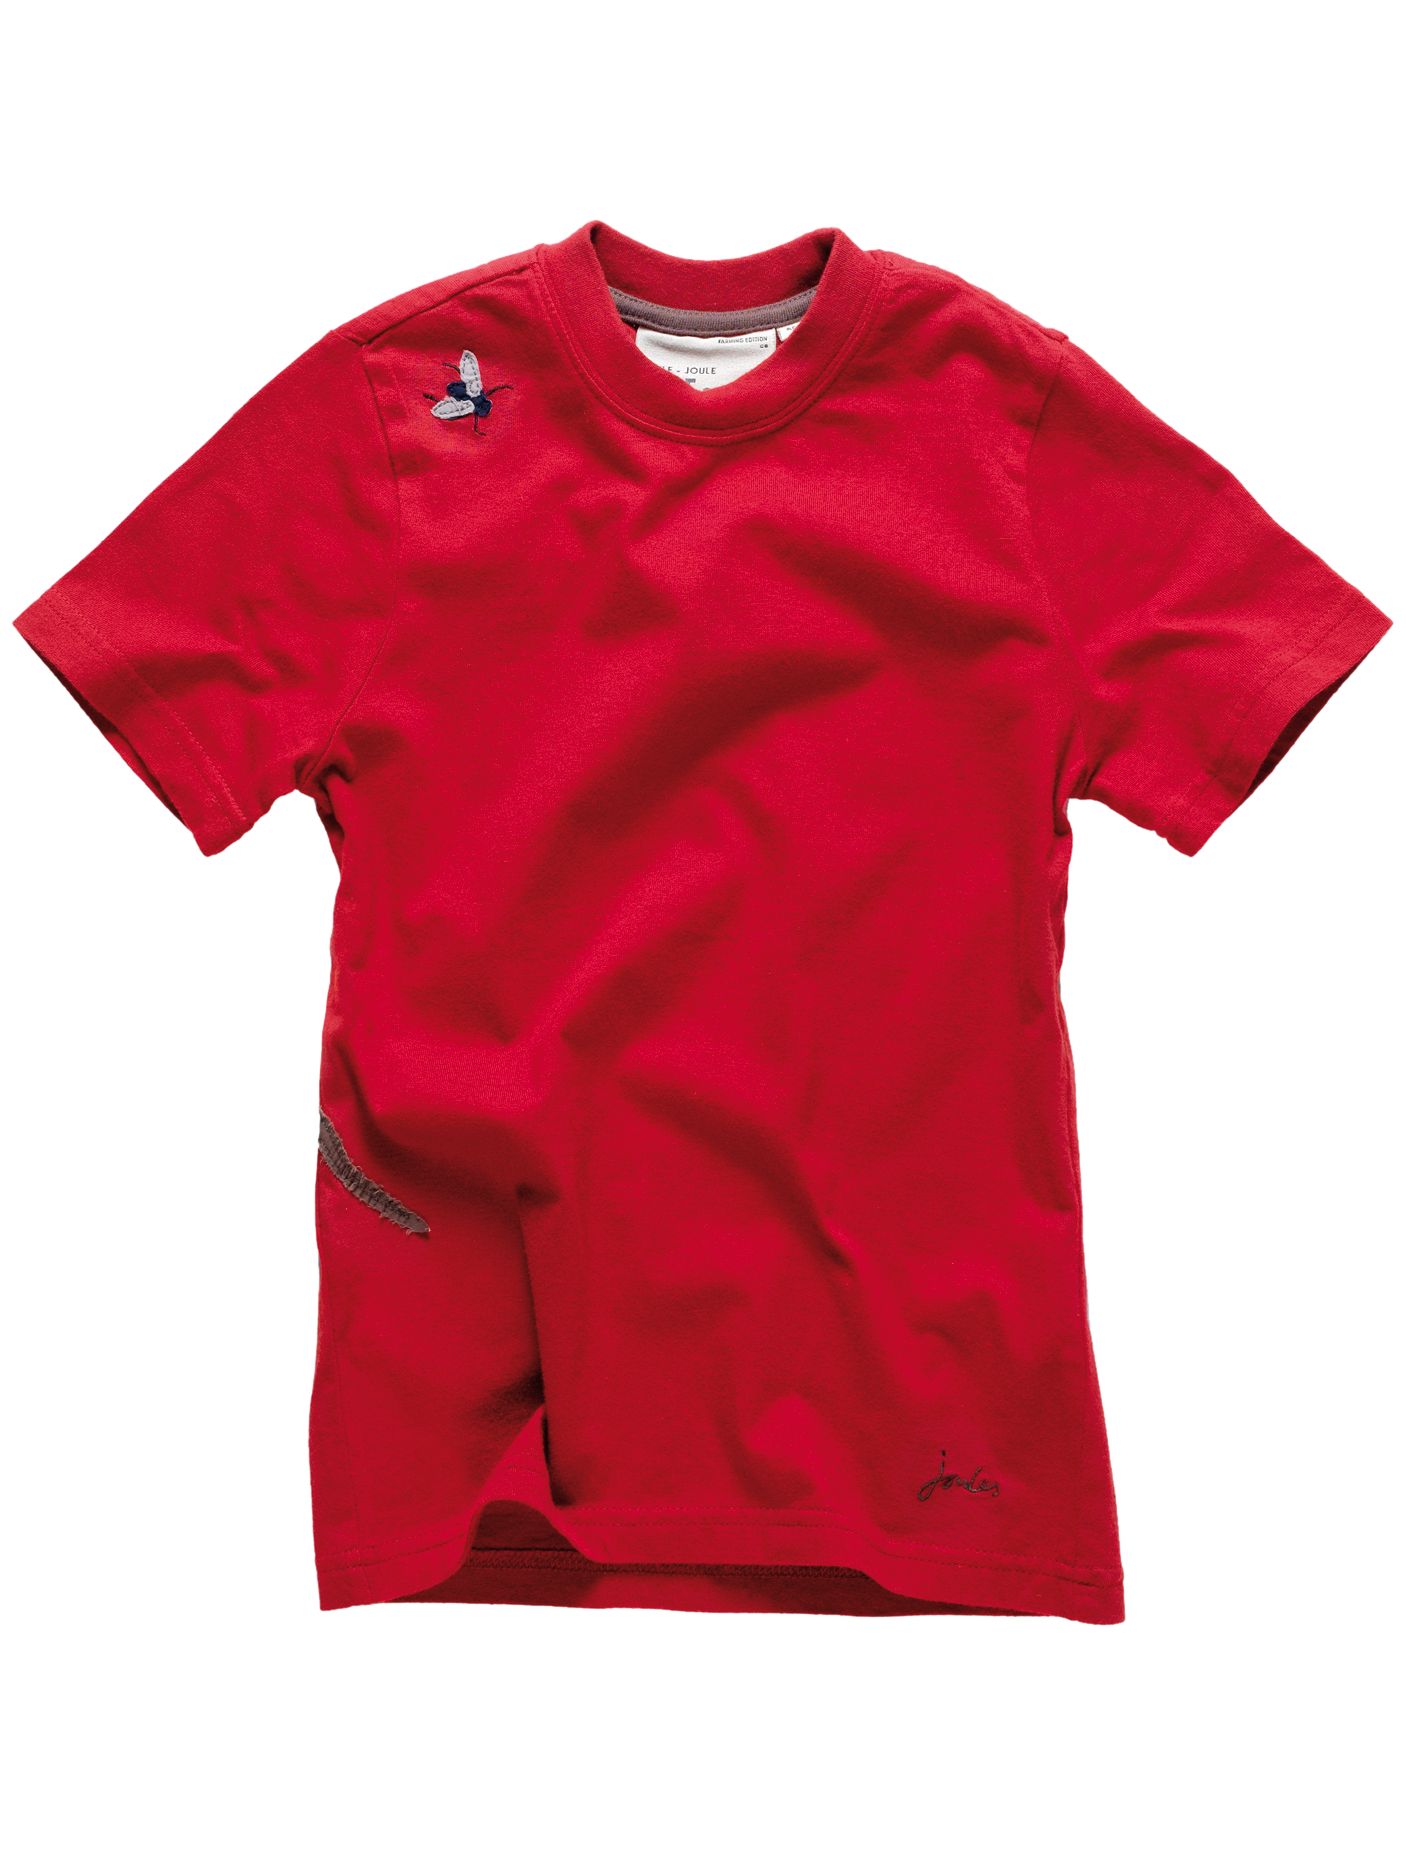 Joules Spider T-Shirt, Red, 8 Years